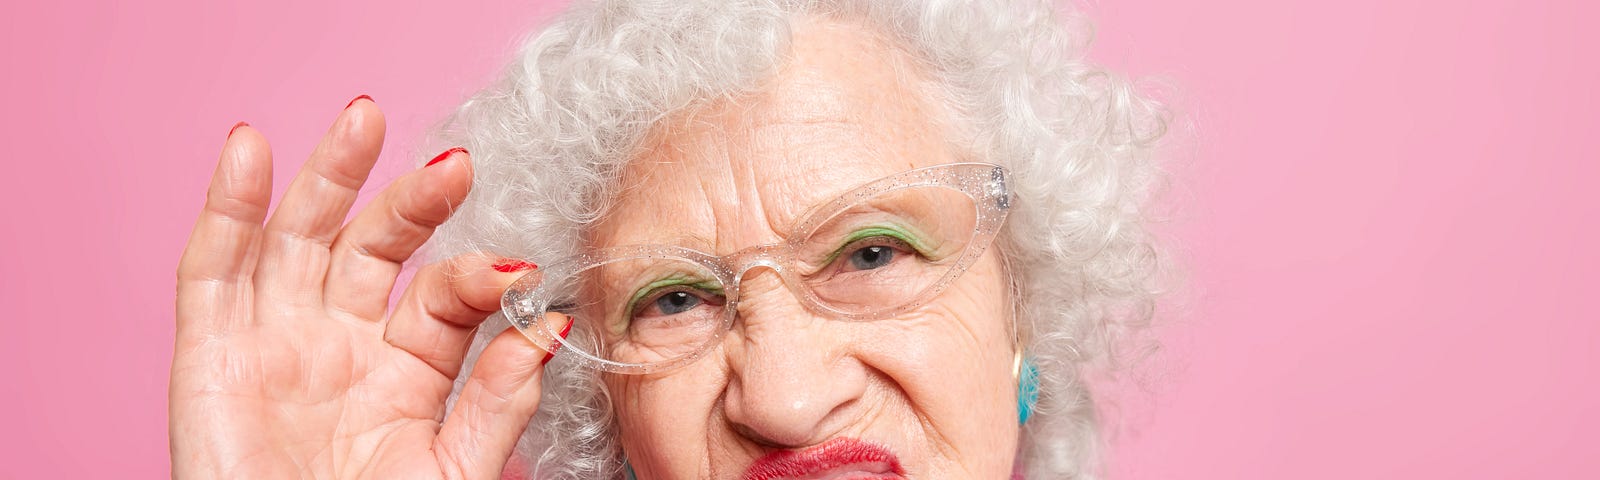 portrait-grey-haired-wrinkled-woman-pouts-lips-looks-attentively-keeps-hand-rim-glasses-dressed-fashionable-clothes — Un Swede